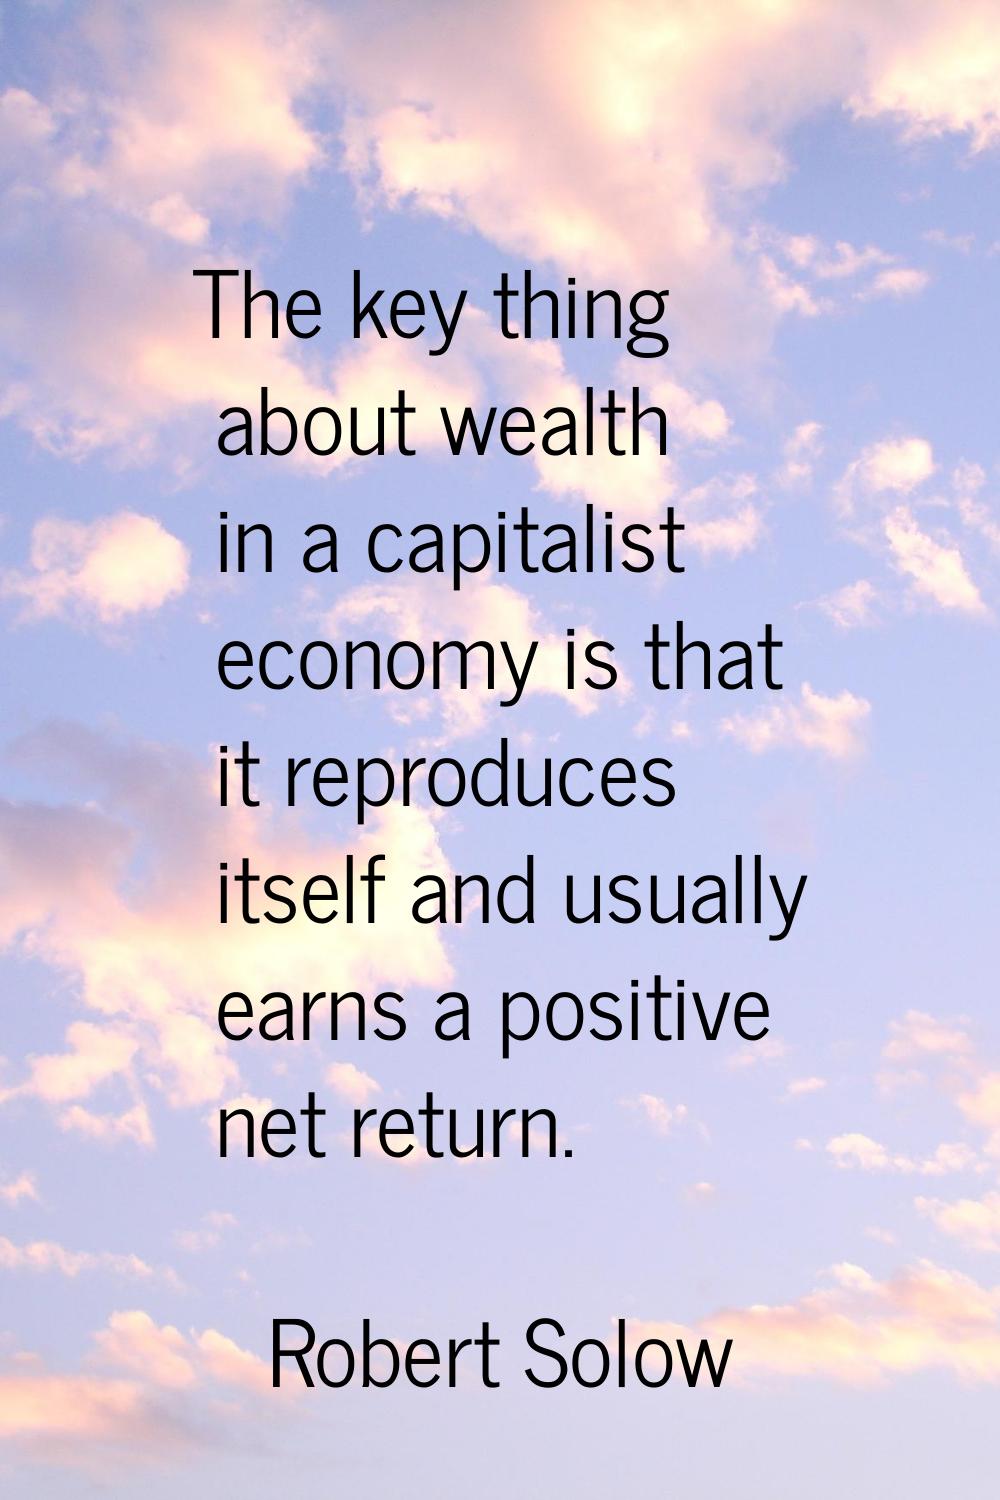 The key thing about wealth in a capitalist economy is that it reproduces itself and usually earns a